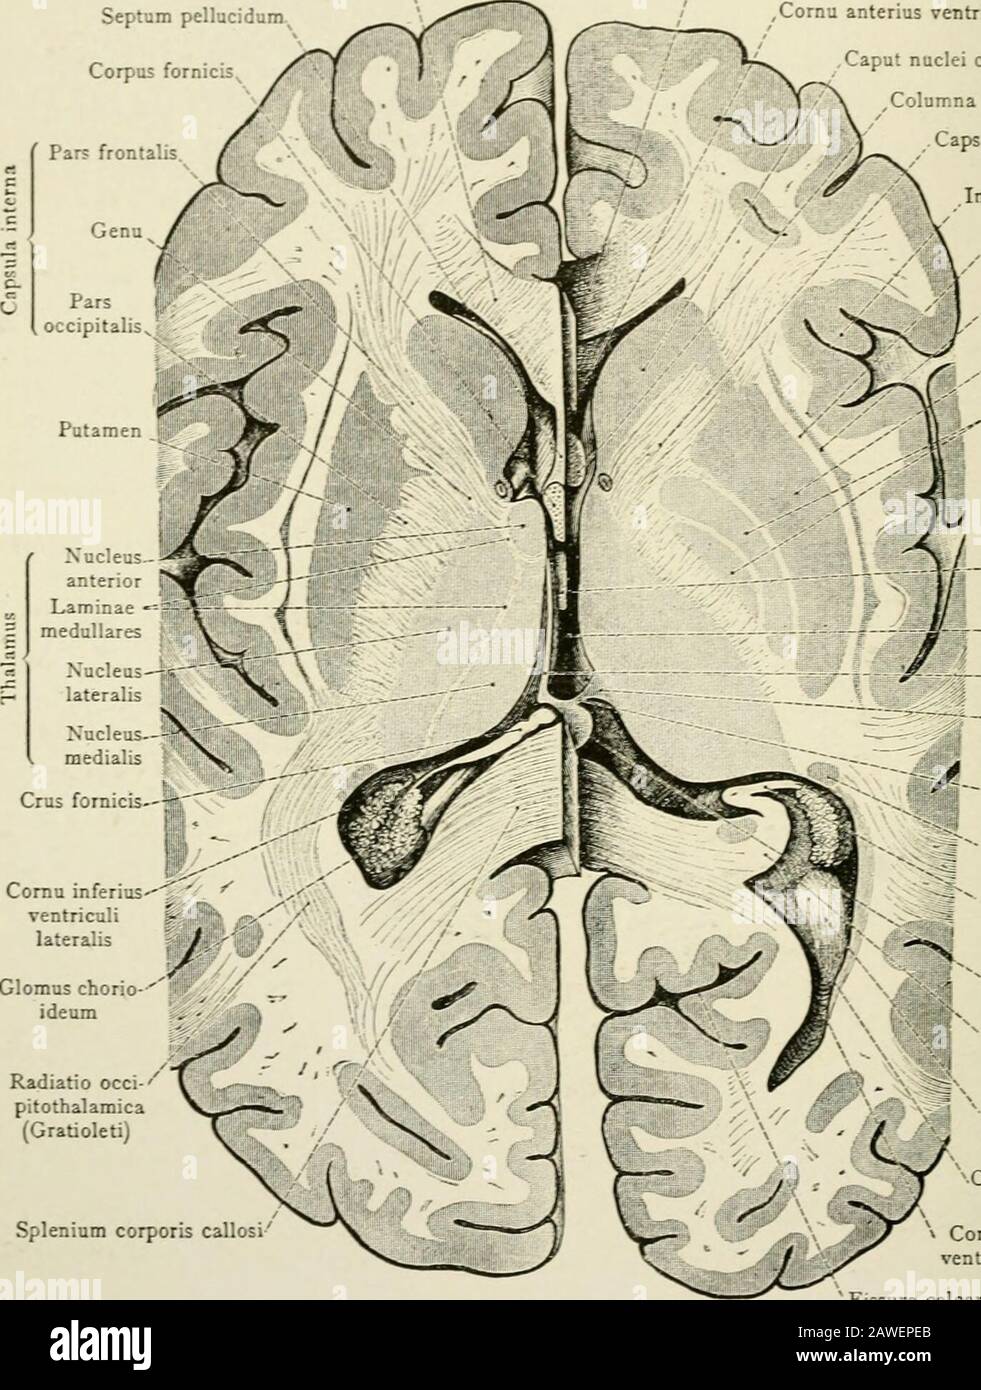 The anatomy of the nervous system, from the standpoint of development and  function . cus medialis - N. vagus Fig. 190.—Frontal section of the human  brain through the splenium of the corpus